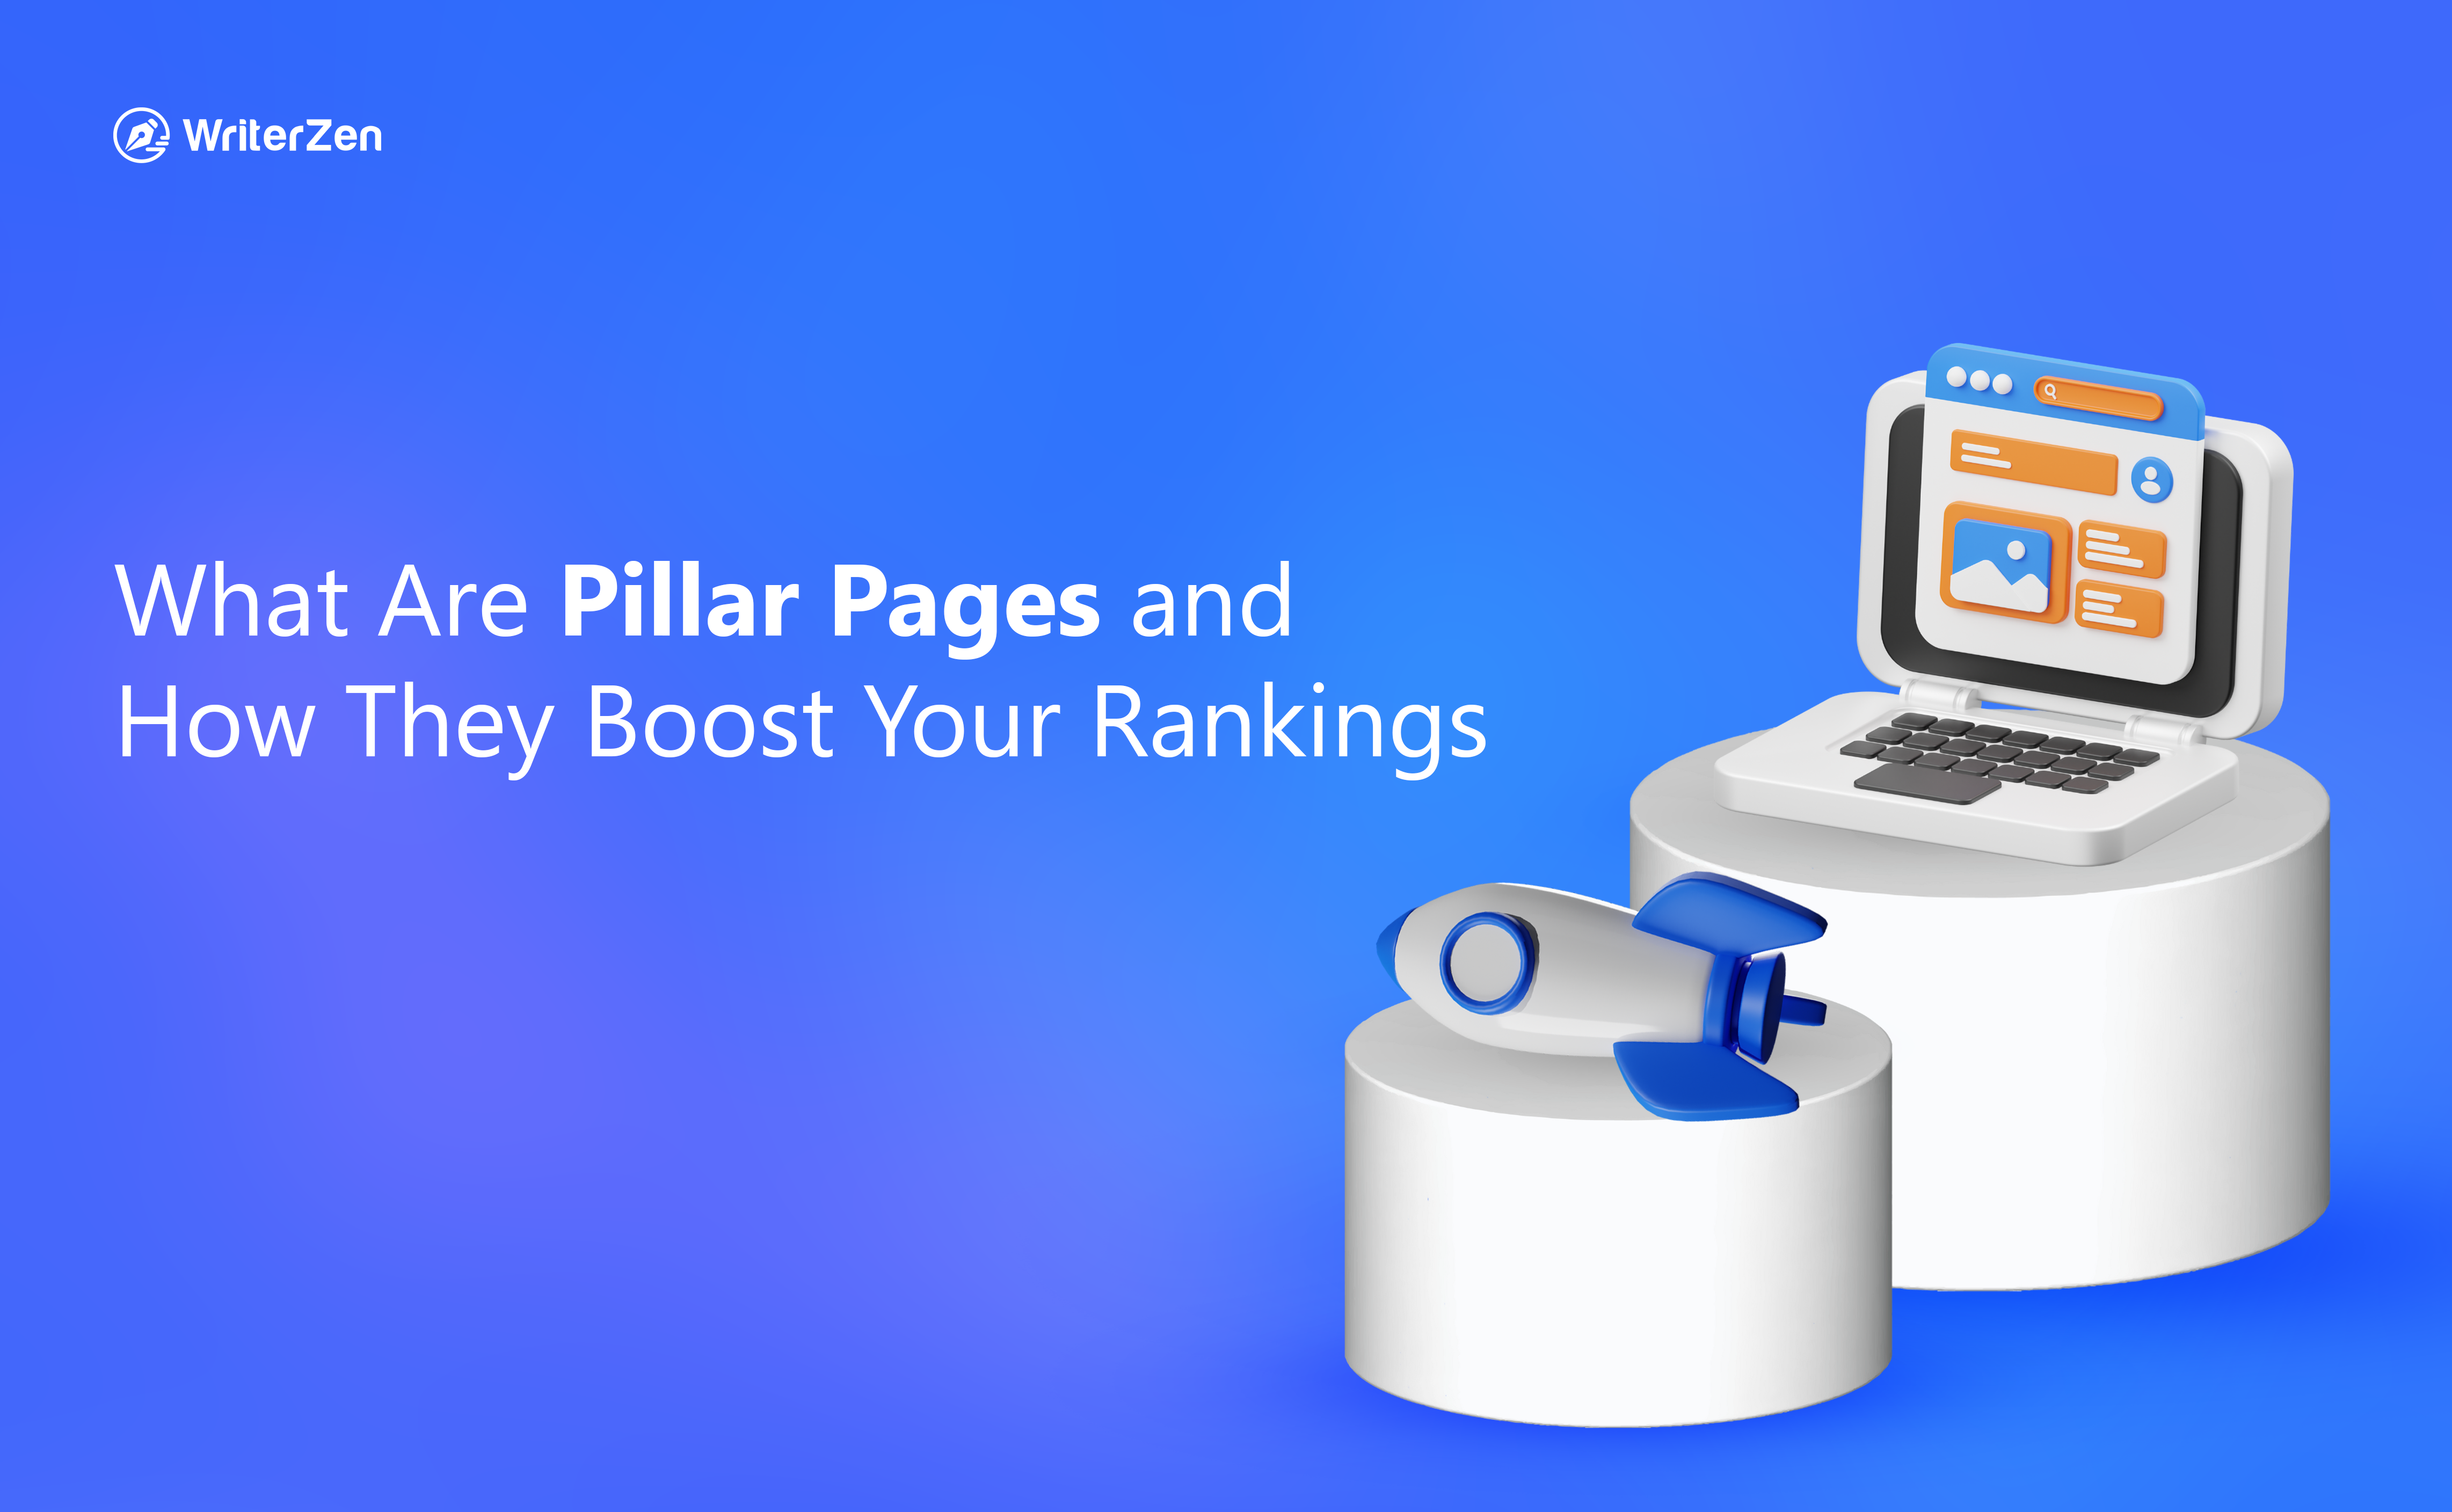 What Are Pillar Pages and How They Boost Your Rankings